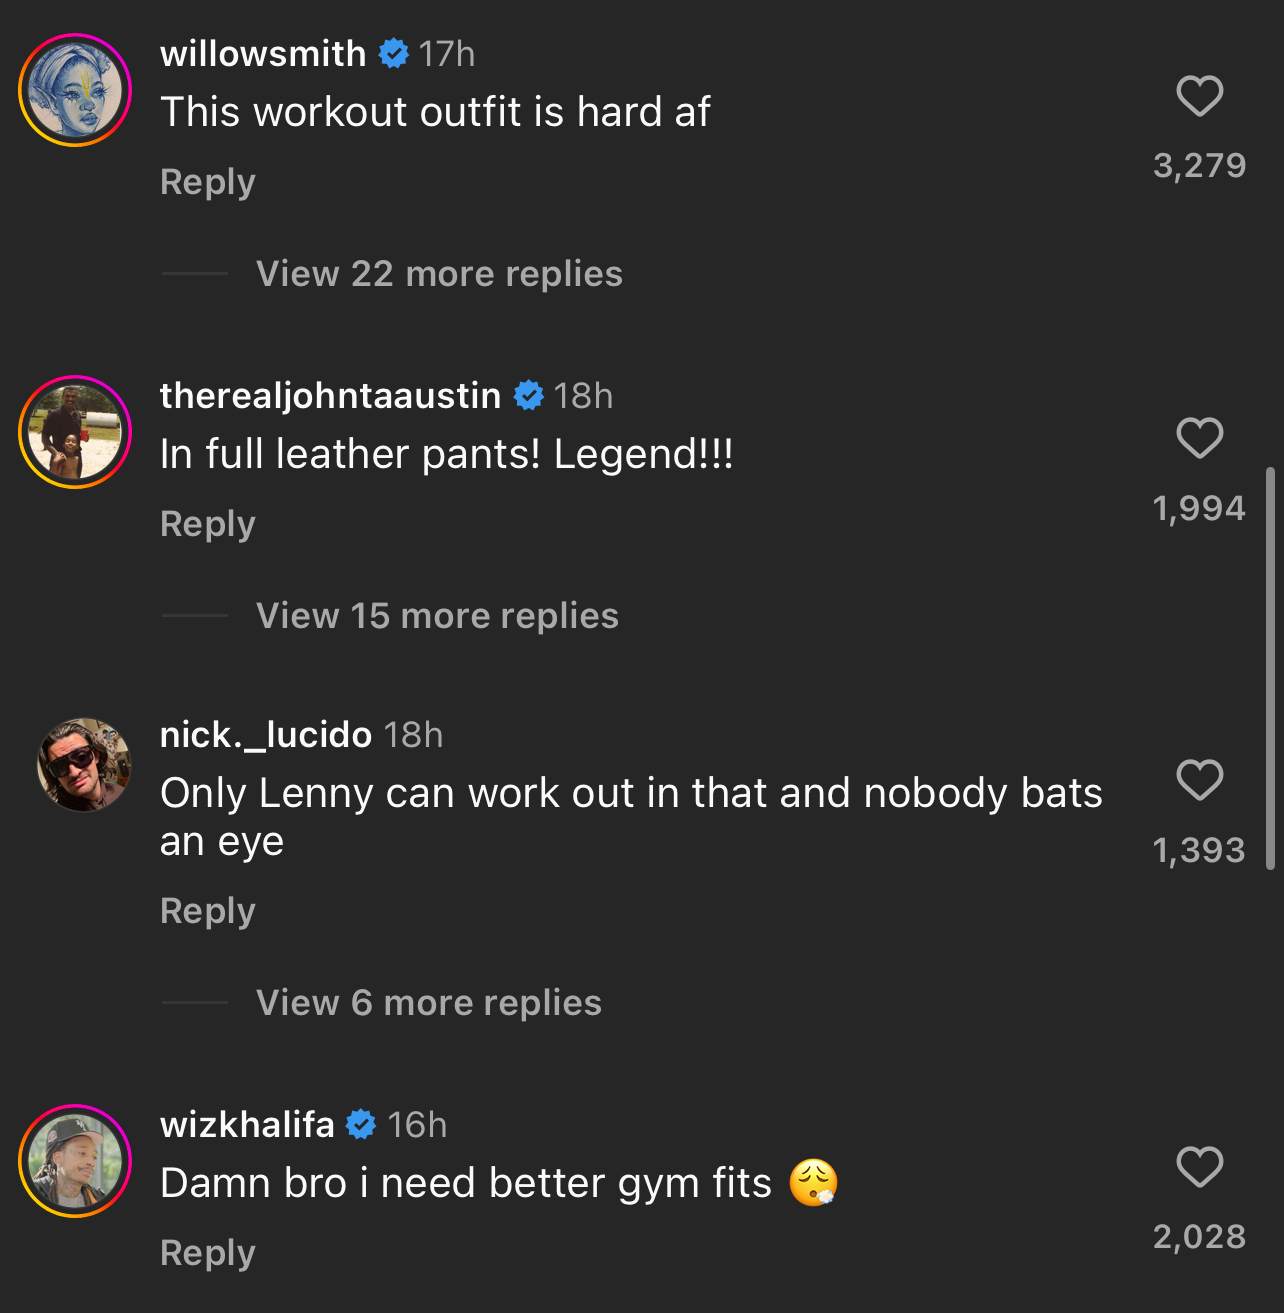 Commenters react to celebrity working out in leather pants, expressing admiration and humor